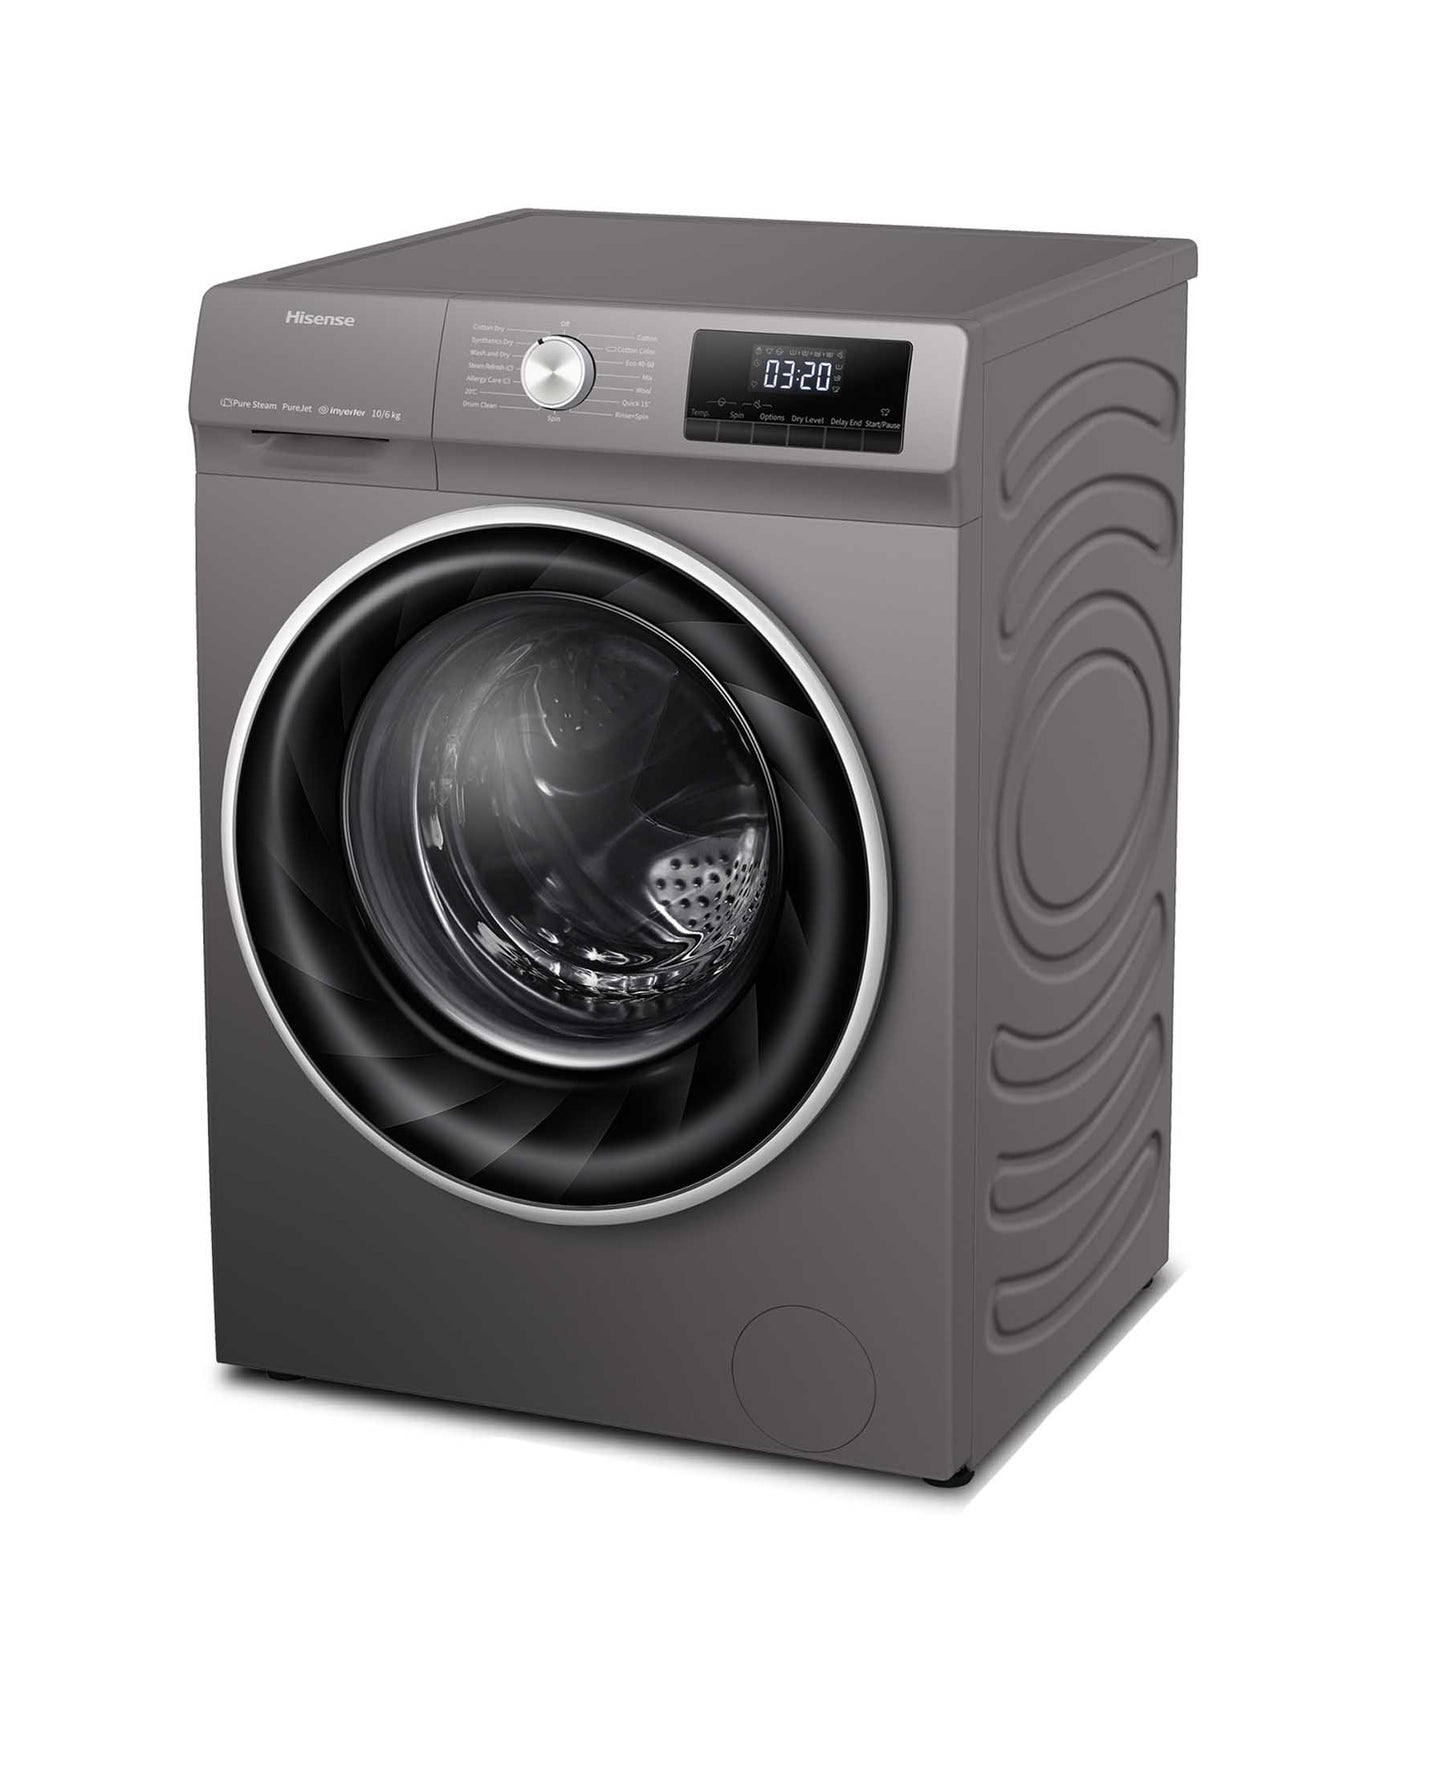 Hisense 10KG FRONT LOAD WASHER AND DRYER WDQY1014EVJM